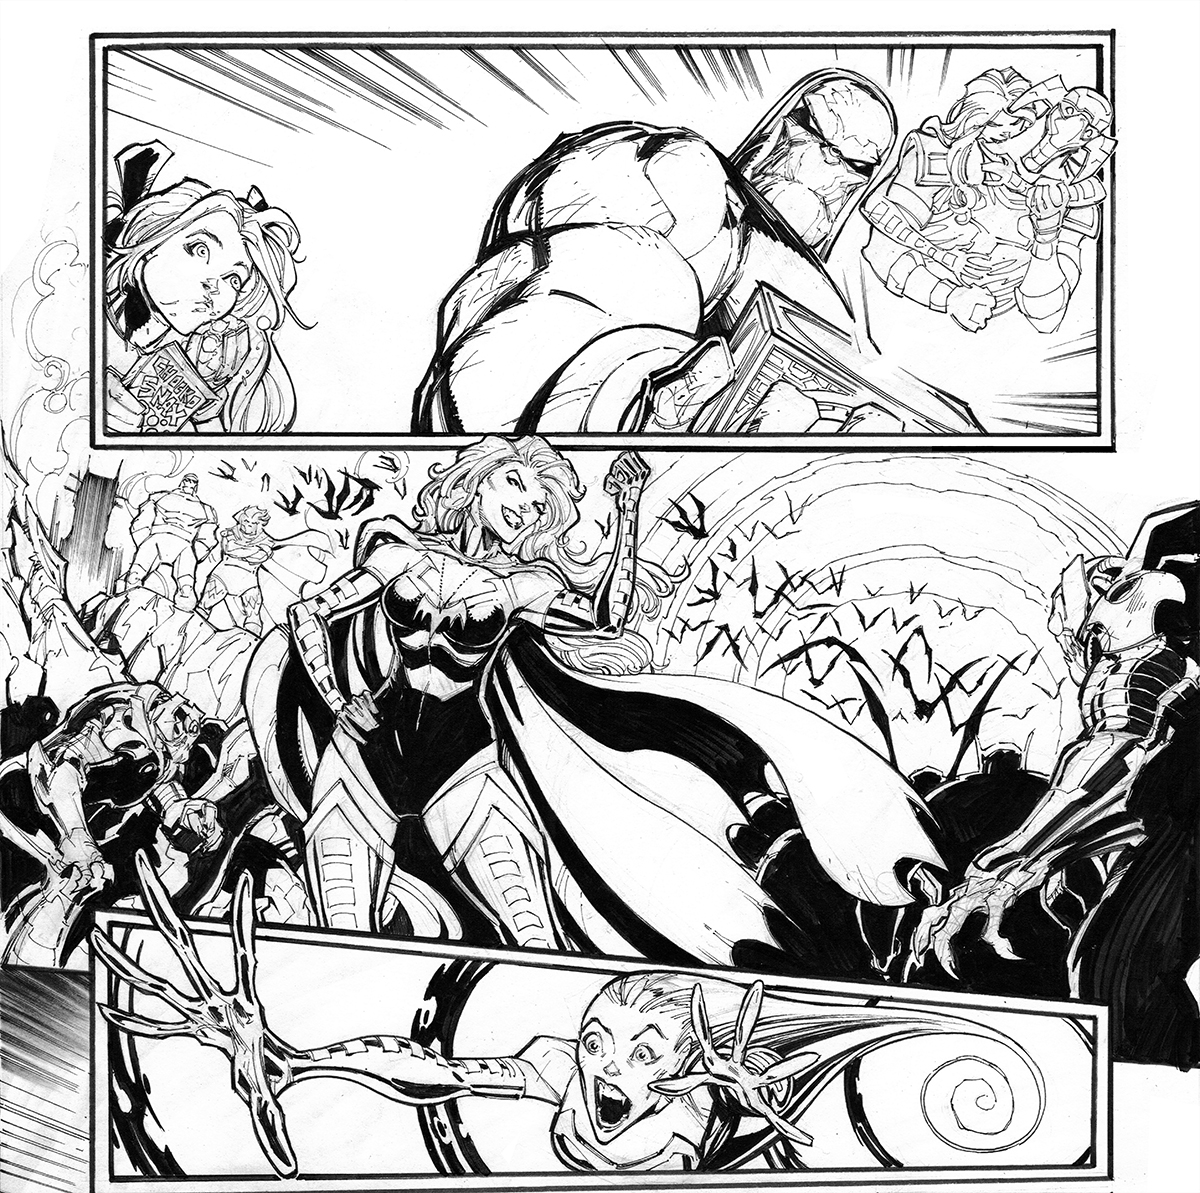 A few raw-scan panels from our ARE YOU AFRAID OF DARKSEID? story featuring Harley Quinn, Darkseid & Bloody Mary-
from @KenBlakePorter, @lgcolorist, @Becca_See & myself!
Out now! @DCComics @thedcnation 